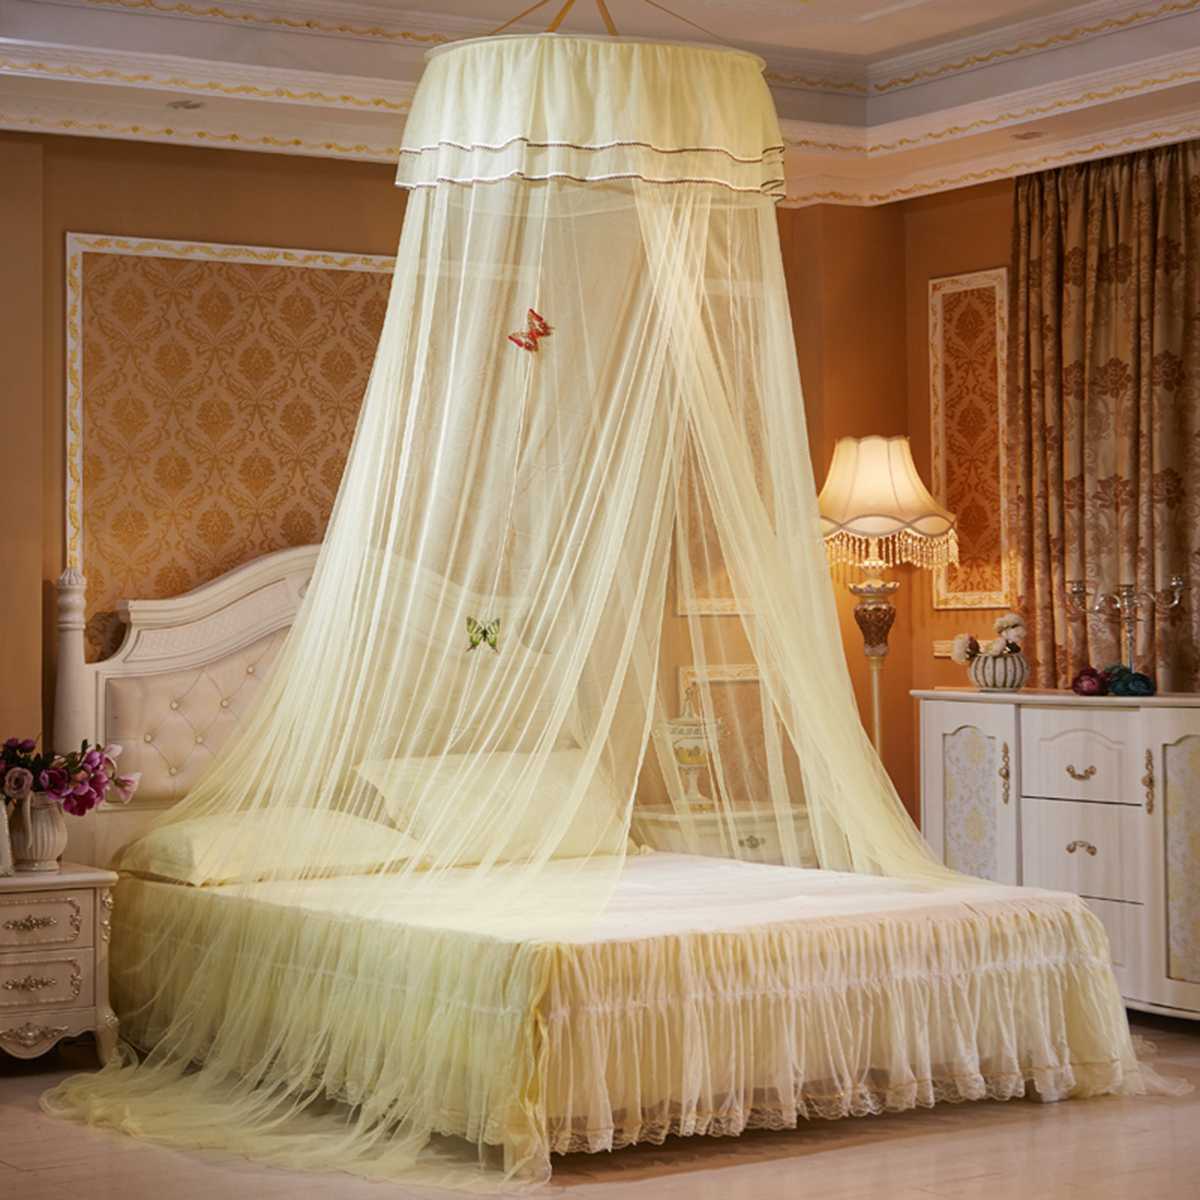 Luxury Princess Lace Palace Hanging Curtain Canopy Mosquito Net Repellent for Single Double Bed Tent Kid Baby Crib (No Bracket)